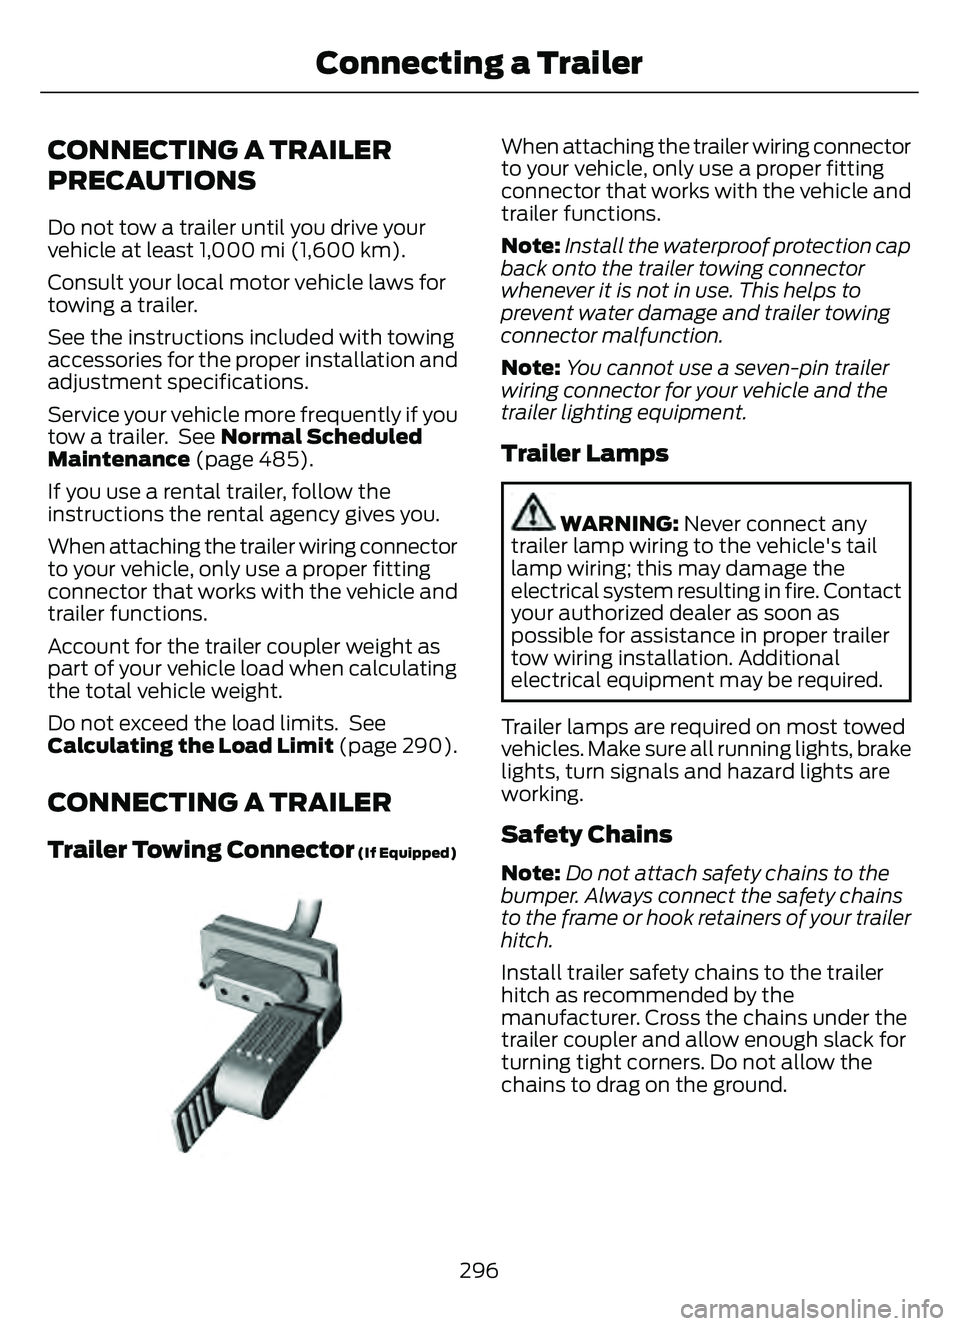 FORD ESCAPE 2022  Owners Manual CONNECTING A TRAILER
PRECAUTIONS
Do not tow a trailer until you drive your
vehicle at least 1,000 mi (1,600 km).
Consult your local motor vehicle laws for
towing a trailer.
See the instructions includ